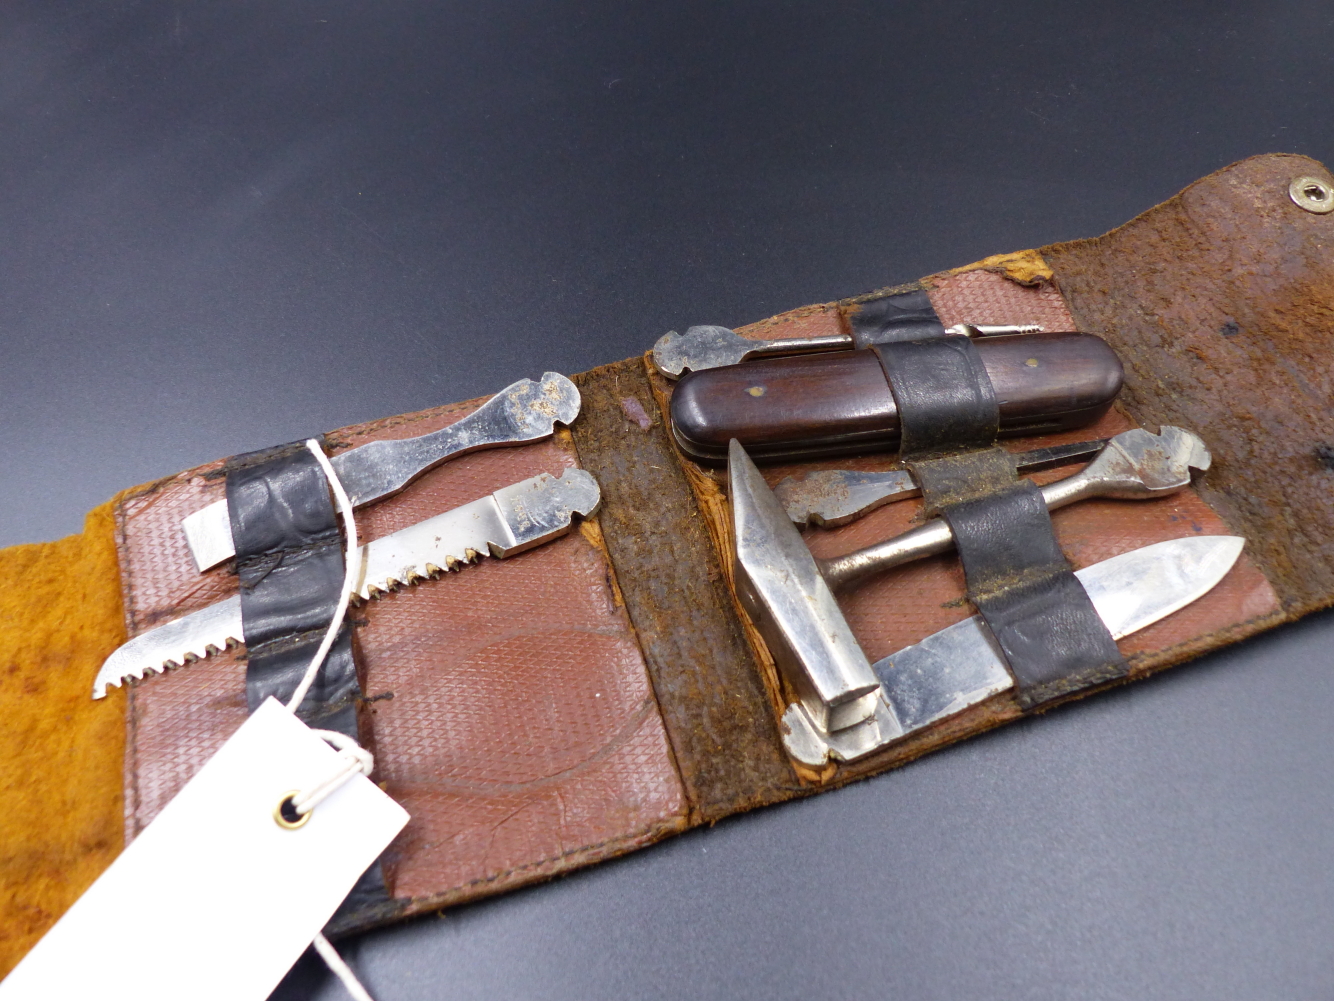 A BONZA TYPE LEATHER CASED TOOL KIT CONTAINING VARIOUS TOOLS AND IMPLEMENTS. - Image 2 of 9